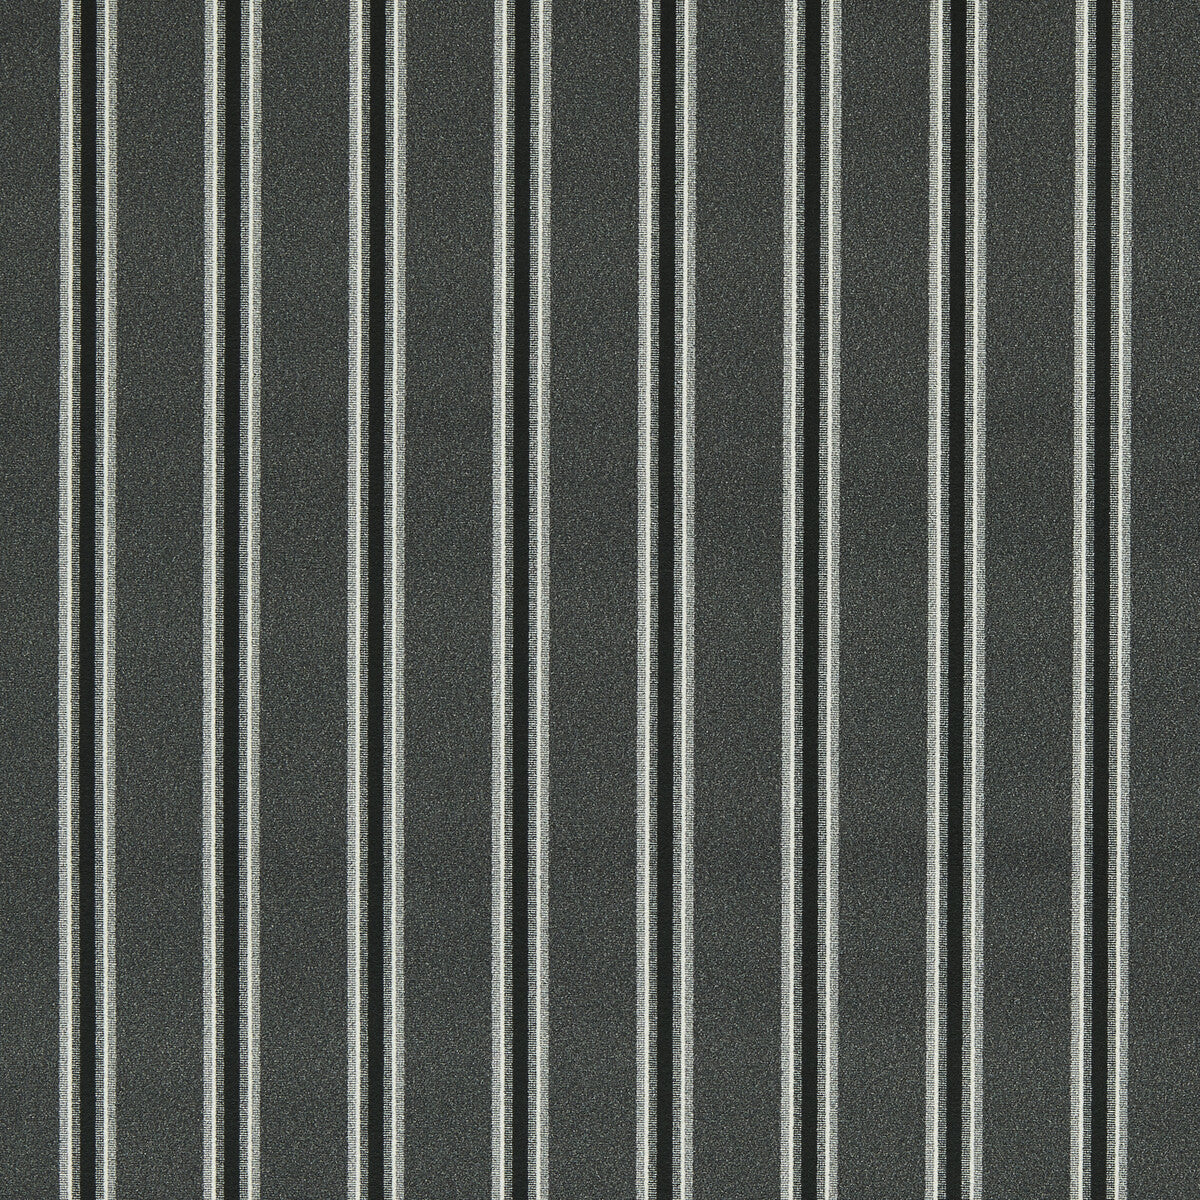 Bowfell fabric in ebony color - pattern F1689/03.CAC.0 - by Clarke And Clarke in the Whitworth collection